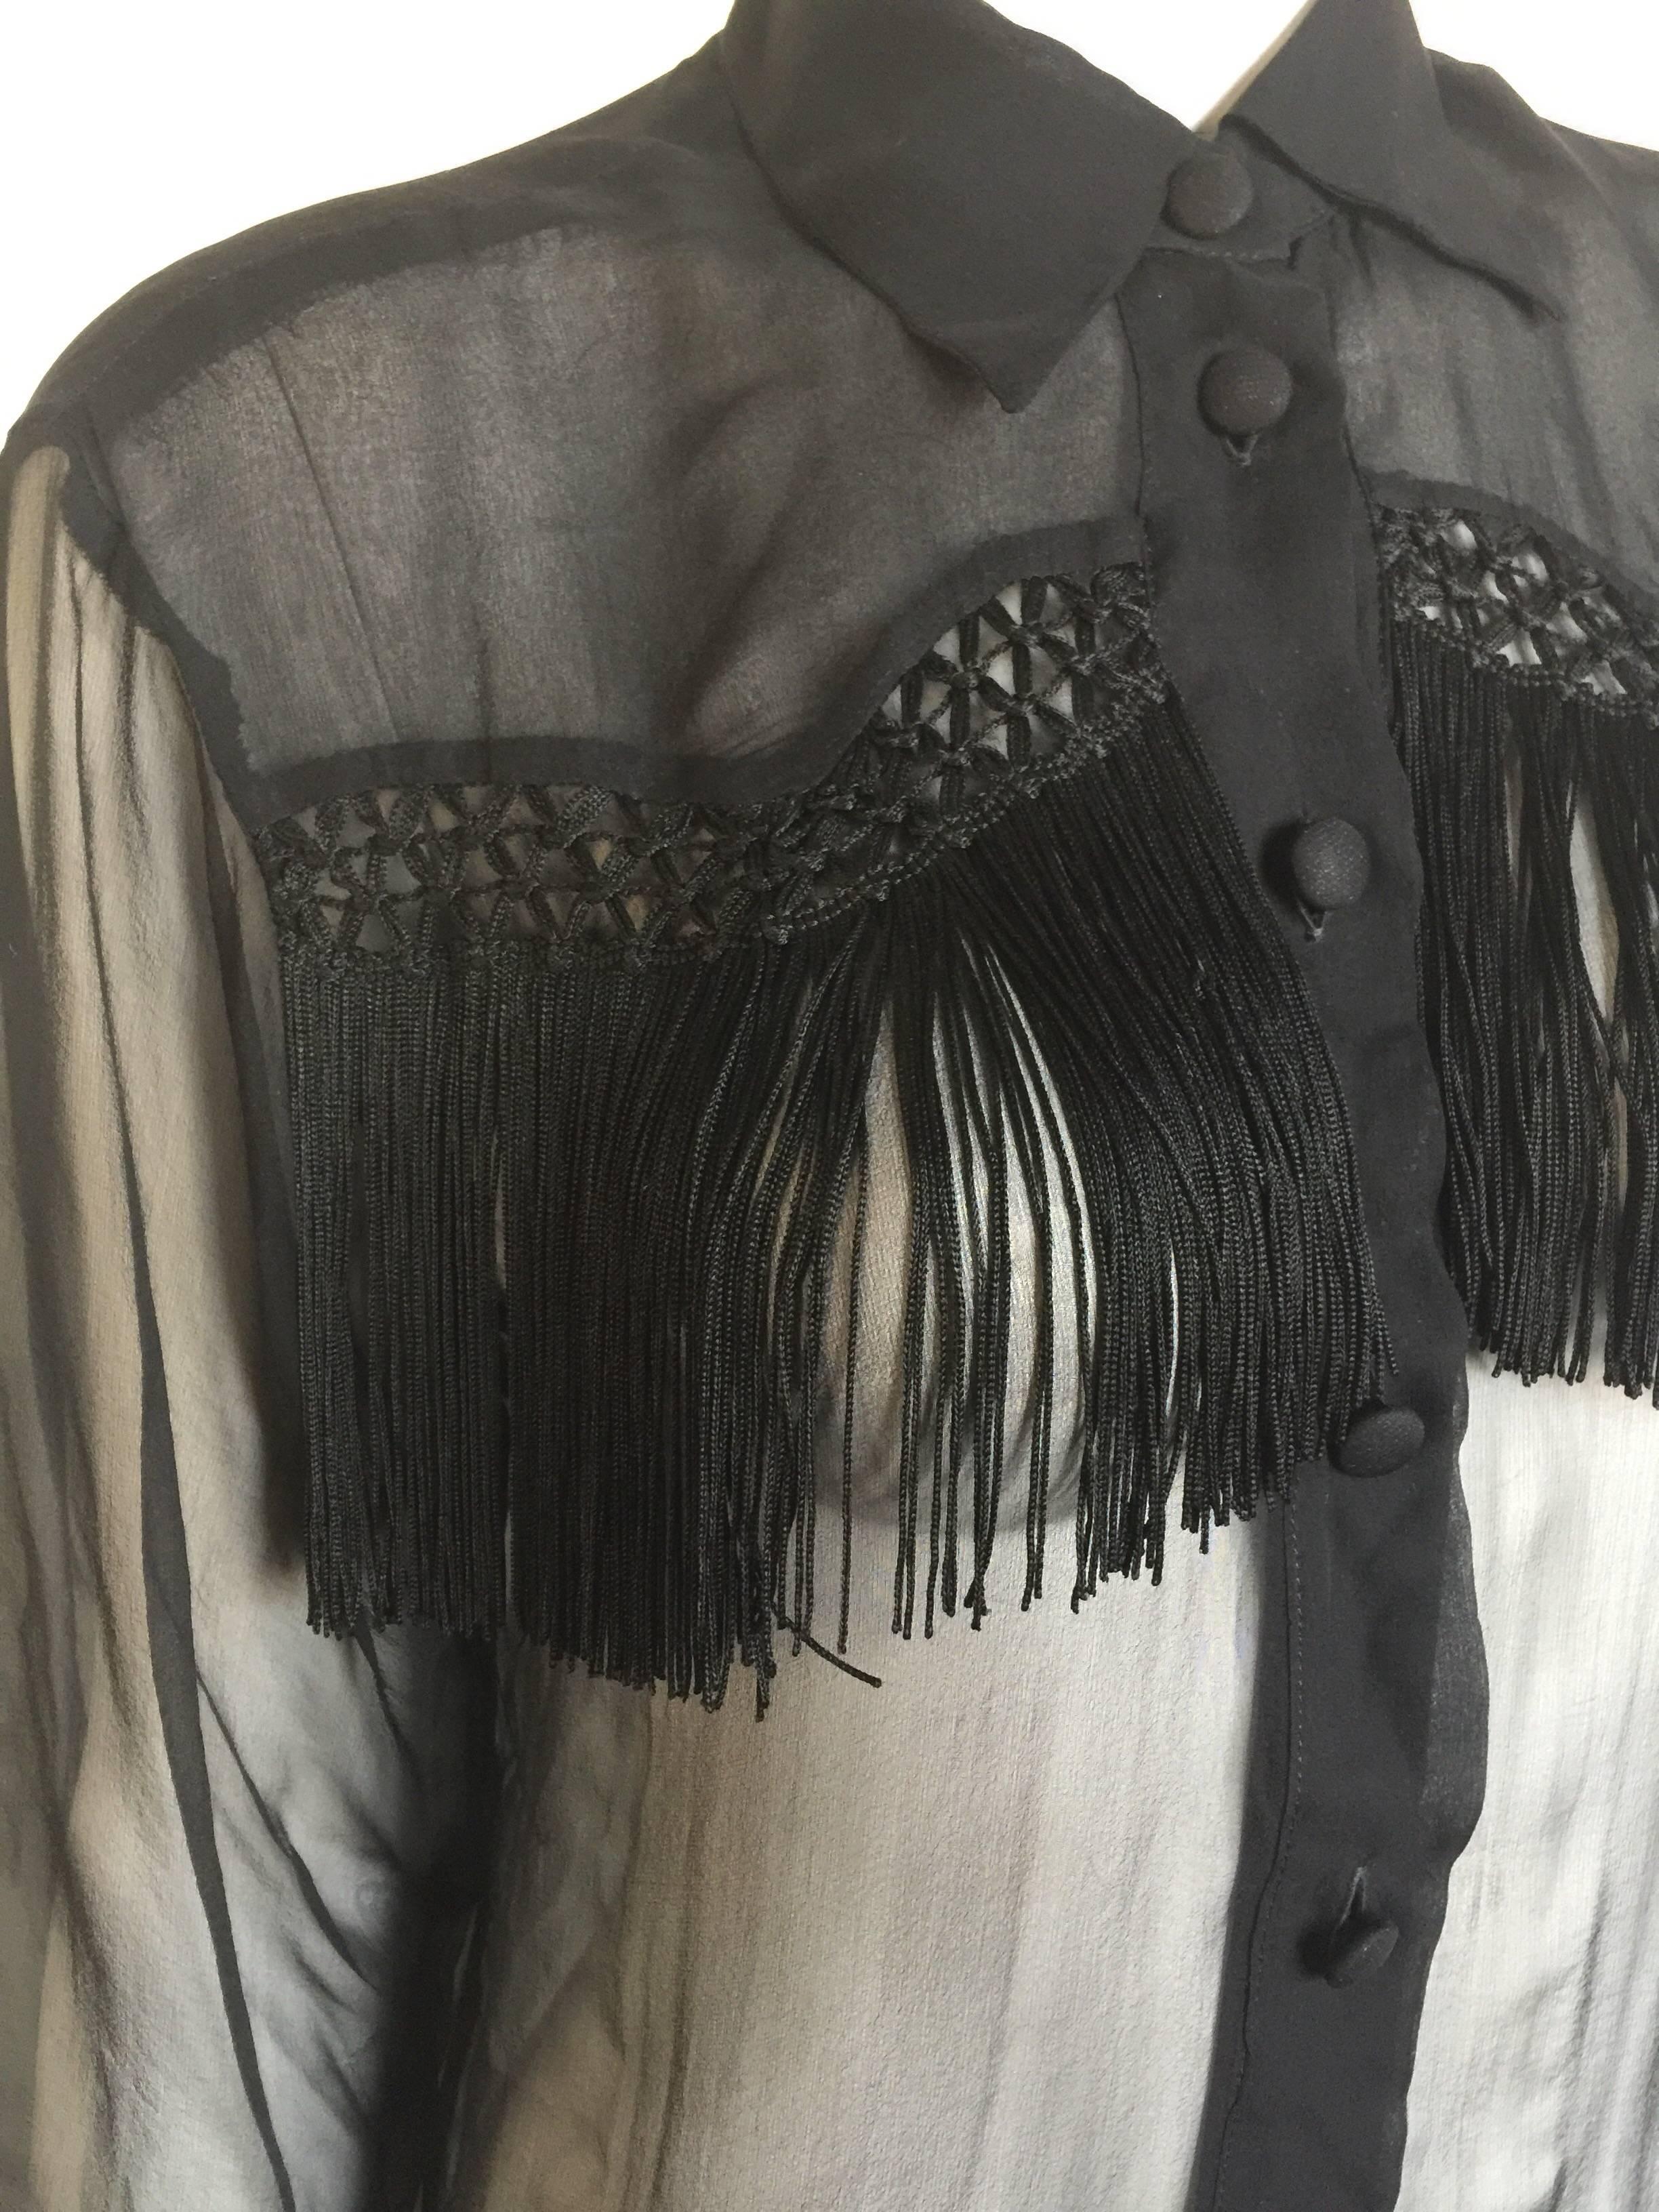 This 1980s Moschino Couture blouse is a silk chiffon and very sheer with a cowboys ilk fringe.  